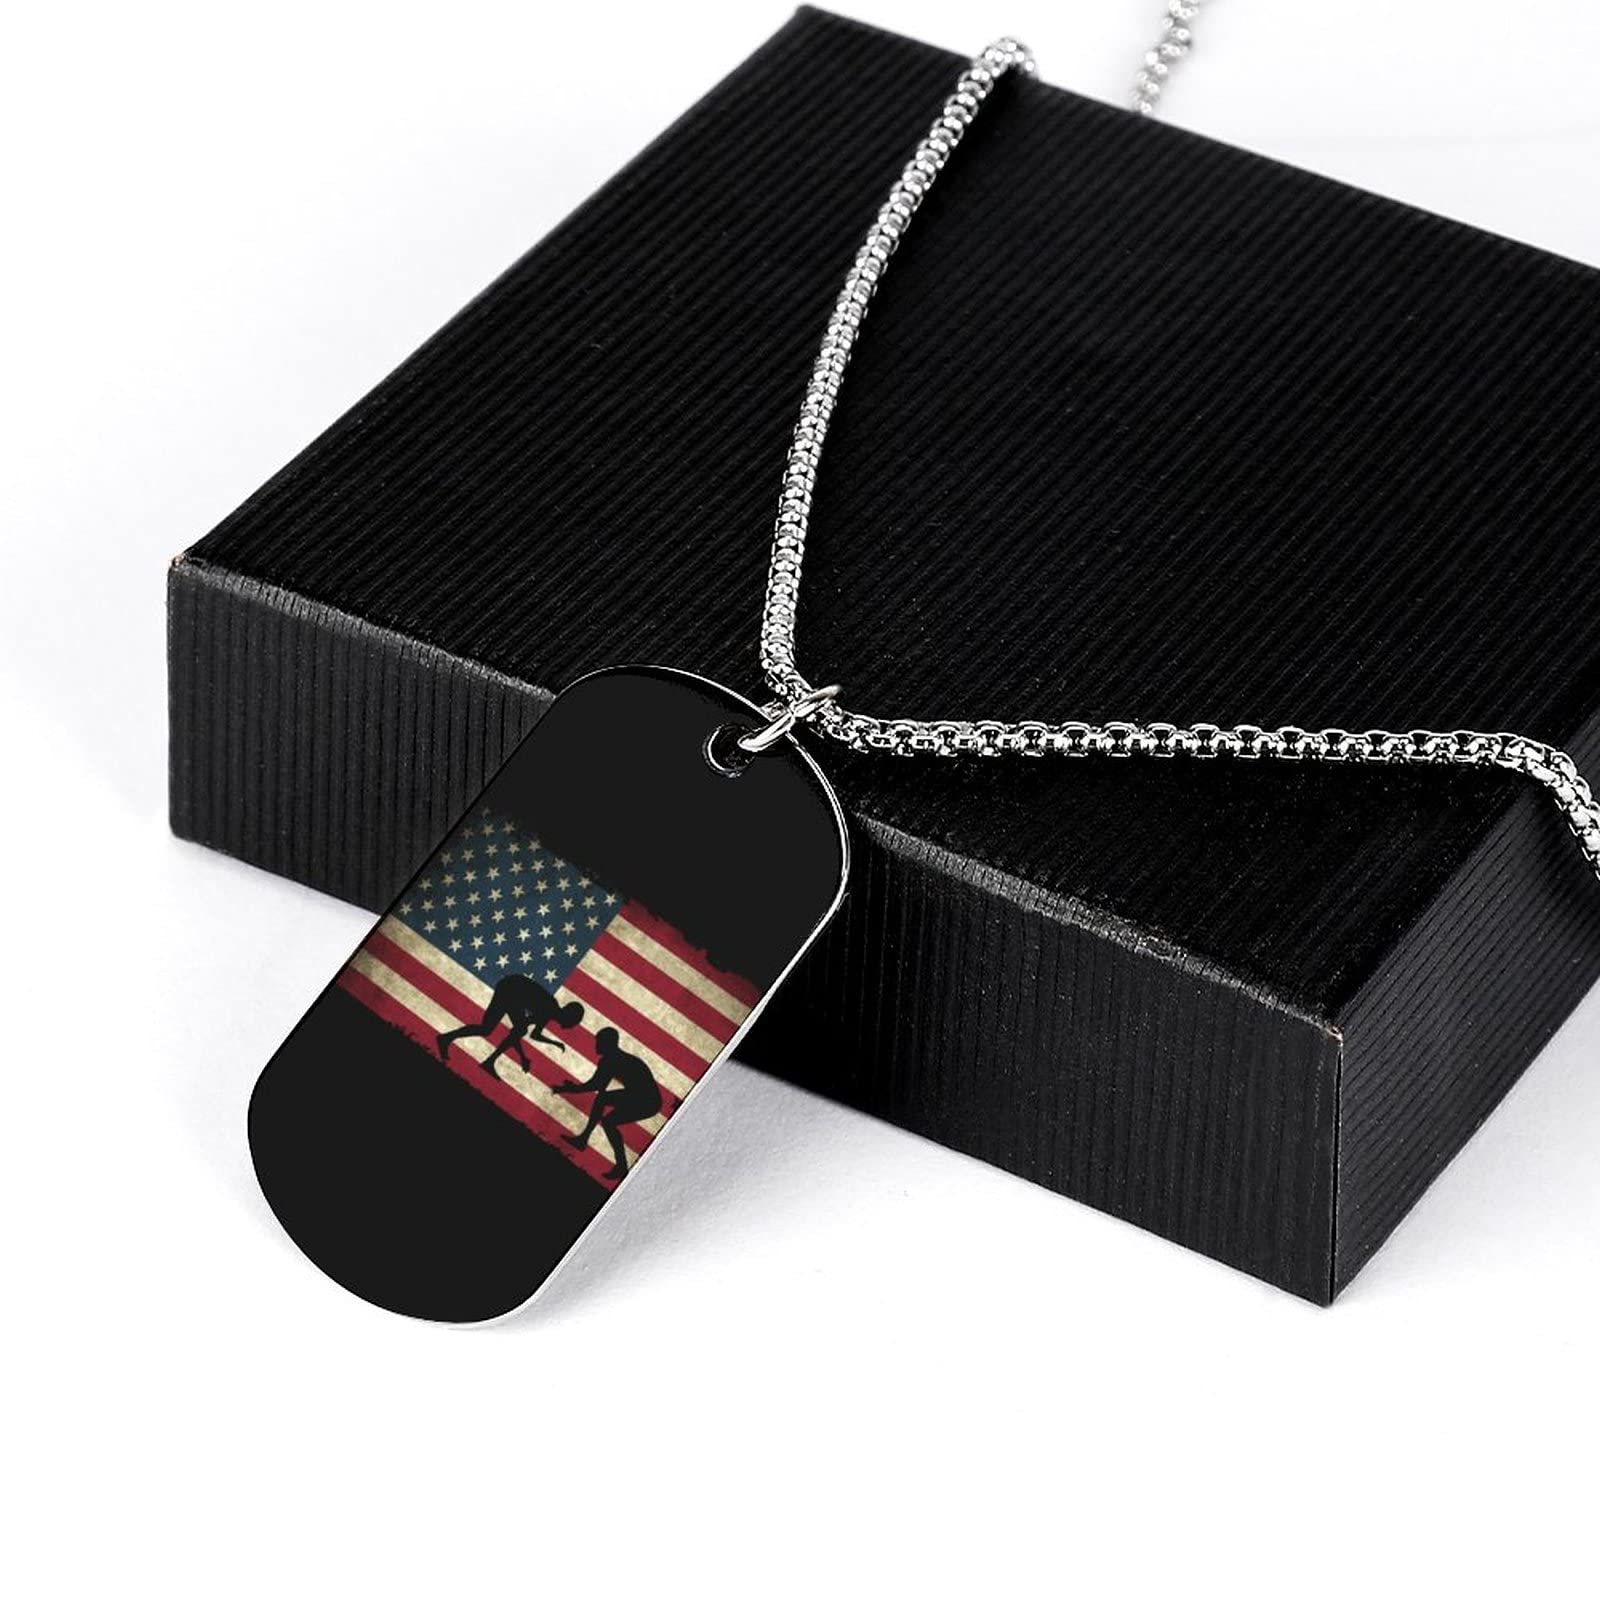 USA Flag Wrestling-1 Necklace Personalized Picture Pendant Necklace Jewelry for Men Women Gift